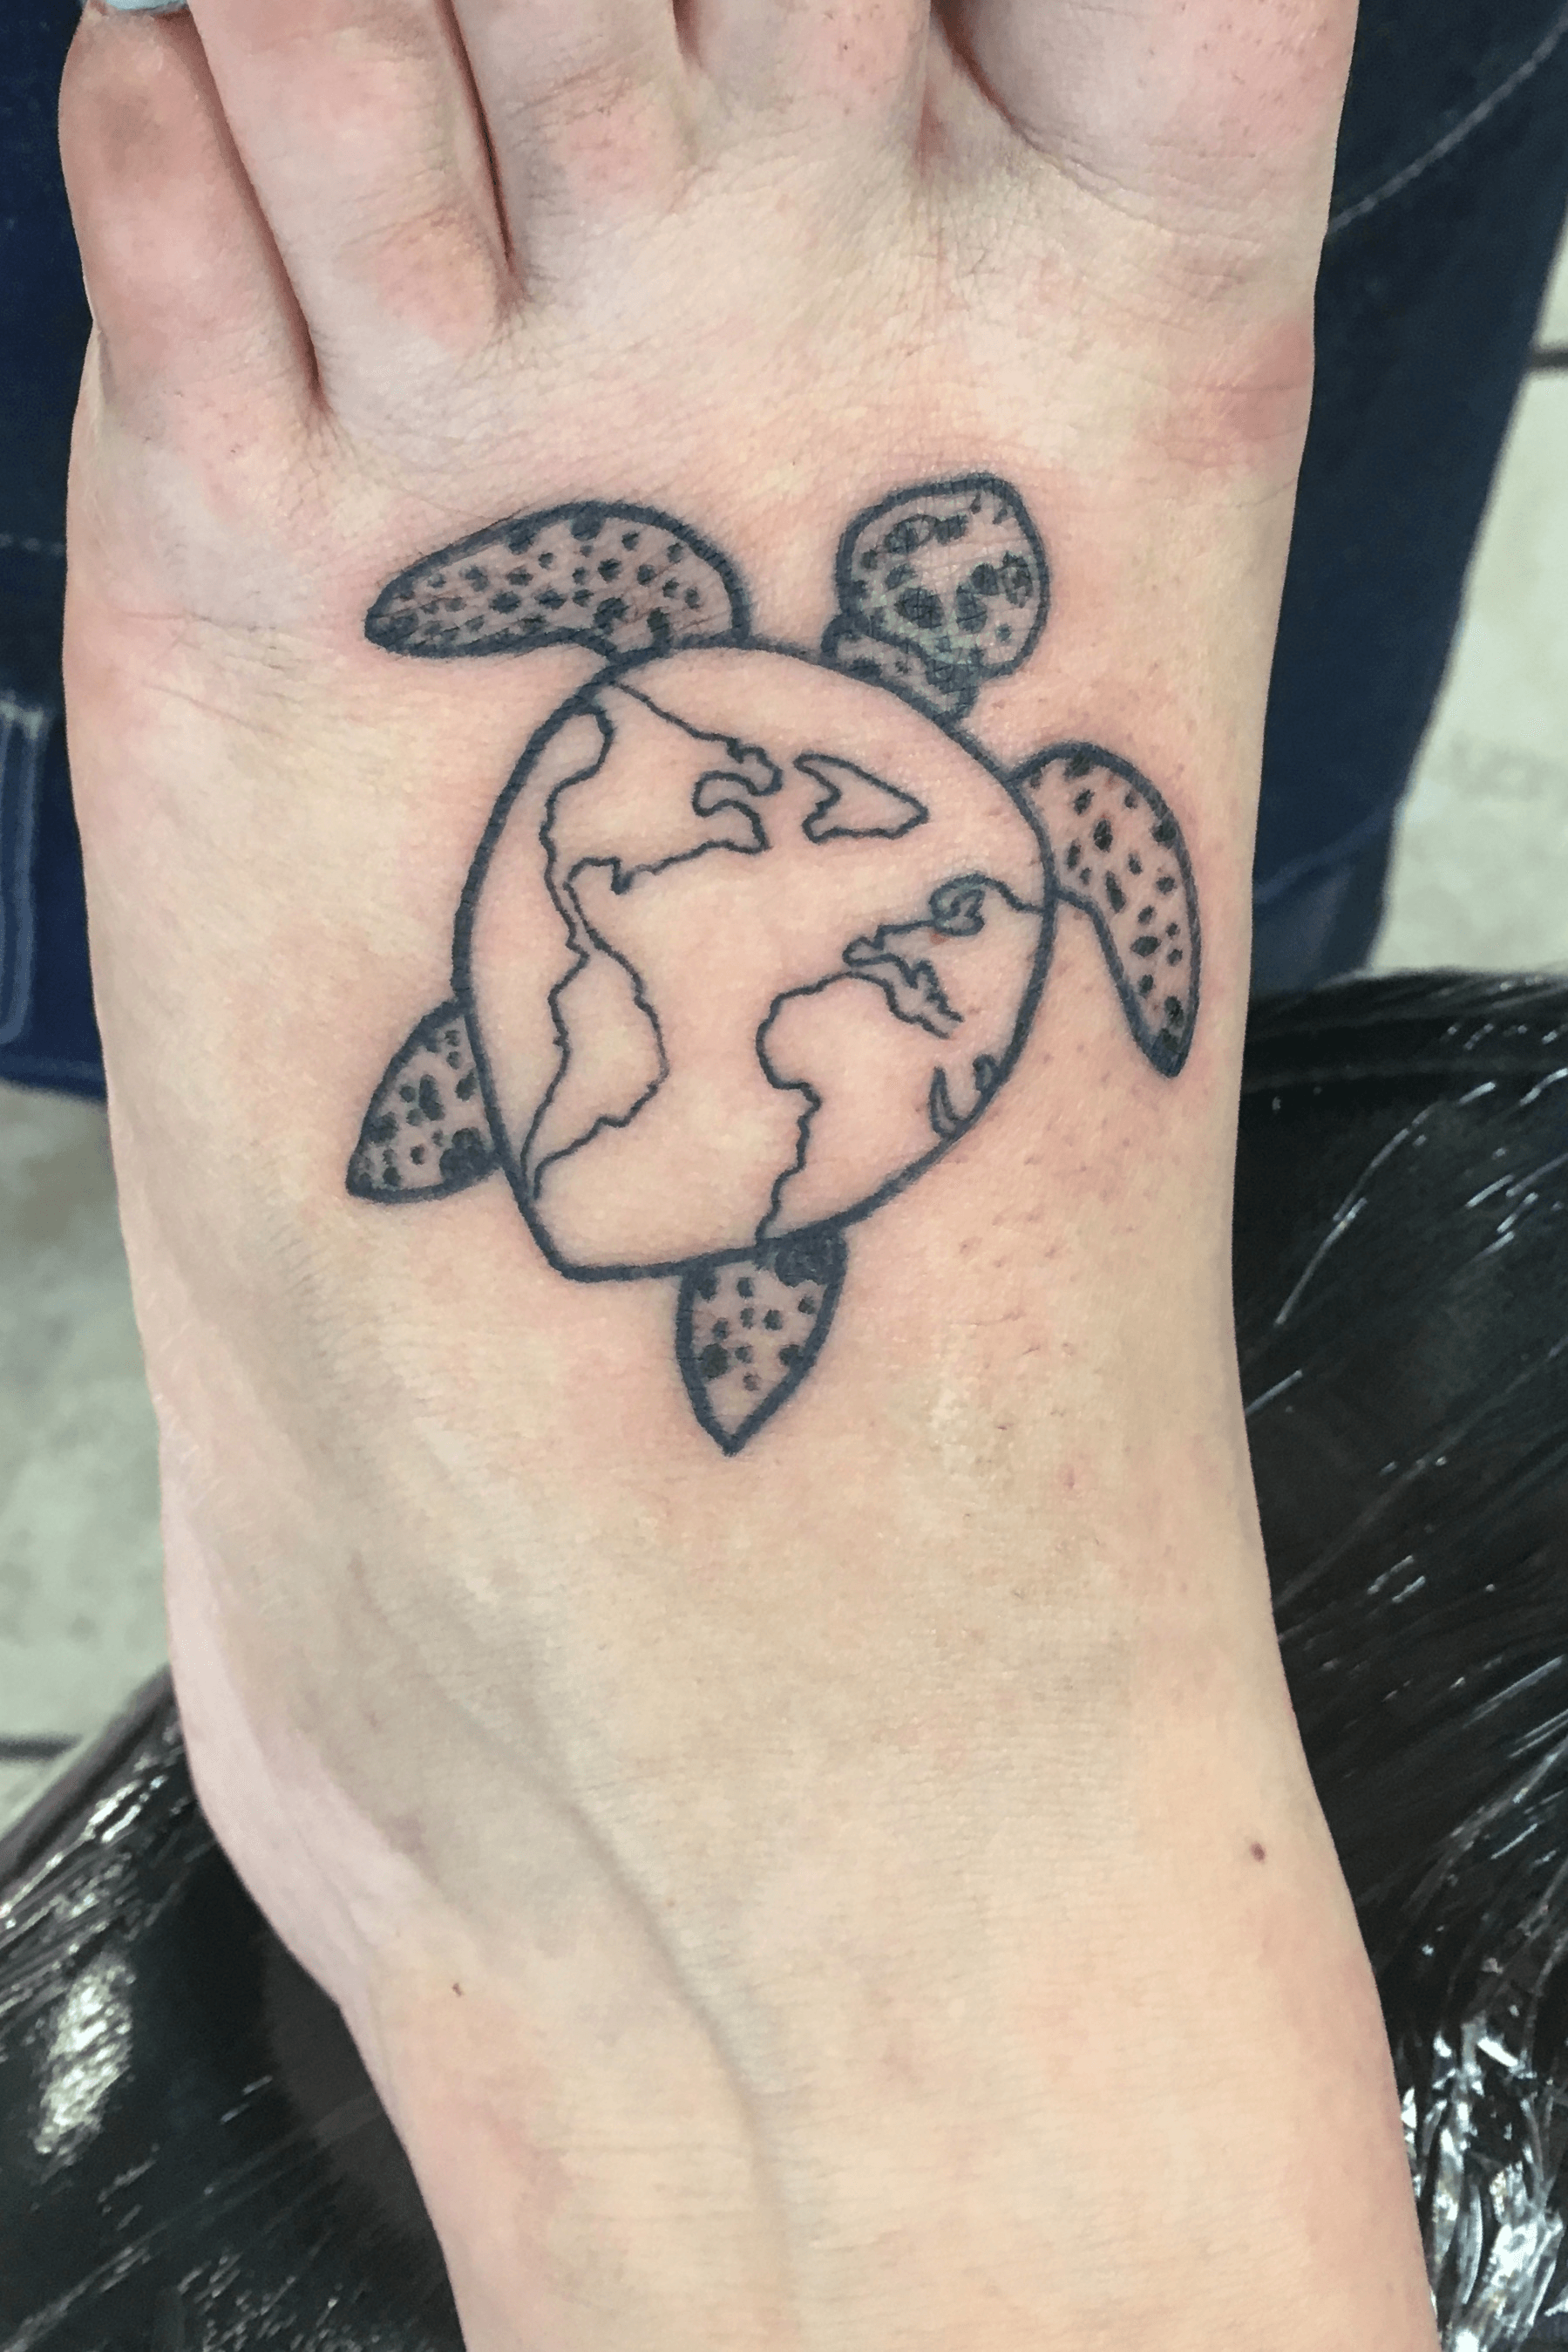 World turtle by Kaelyn Madden at Honest to Goodness in GR Michigan  r tattoos